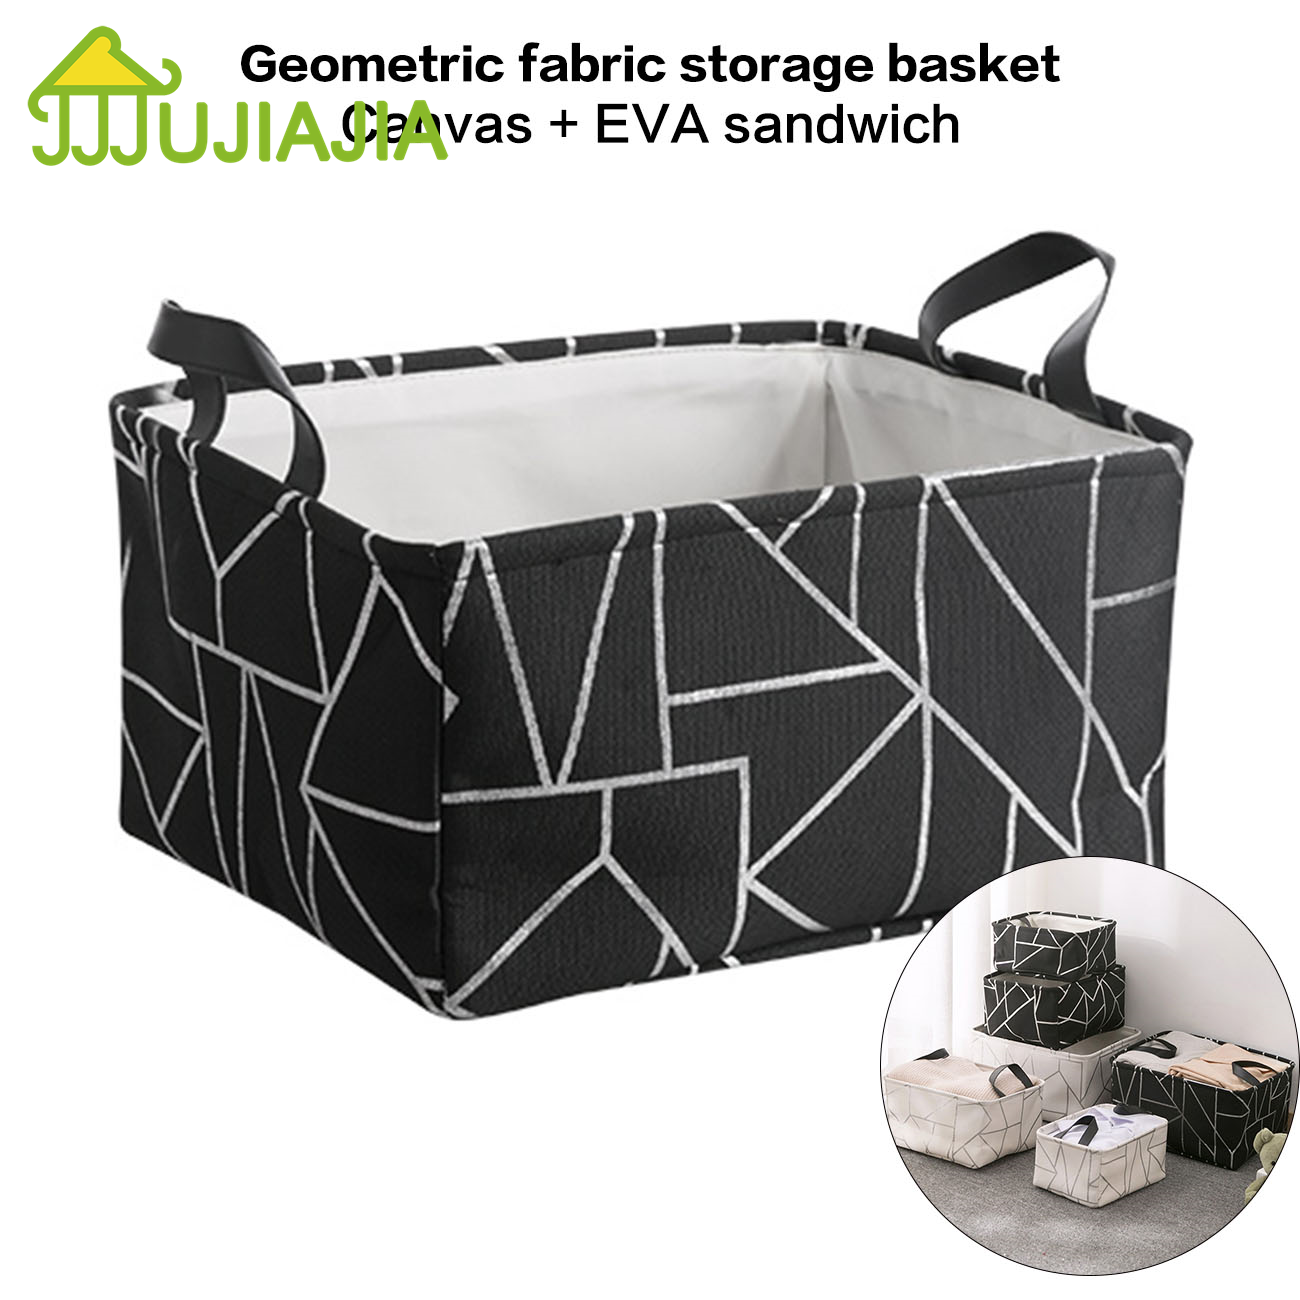 JUJIAJIA Canvas Stacked Geometry Pattern Storage Basket with Handle